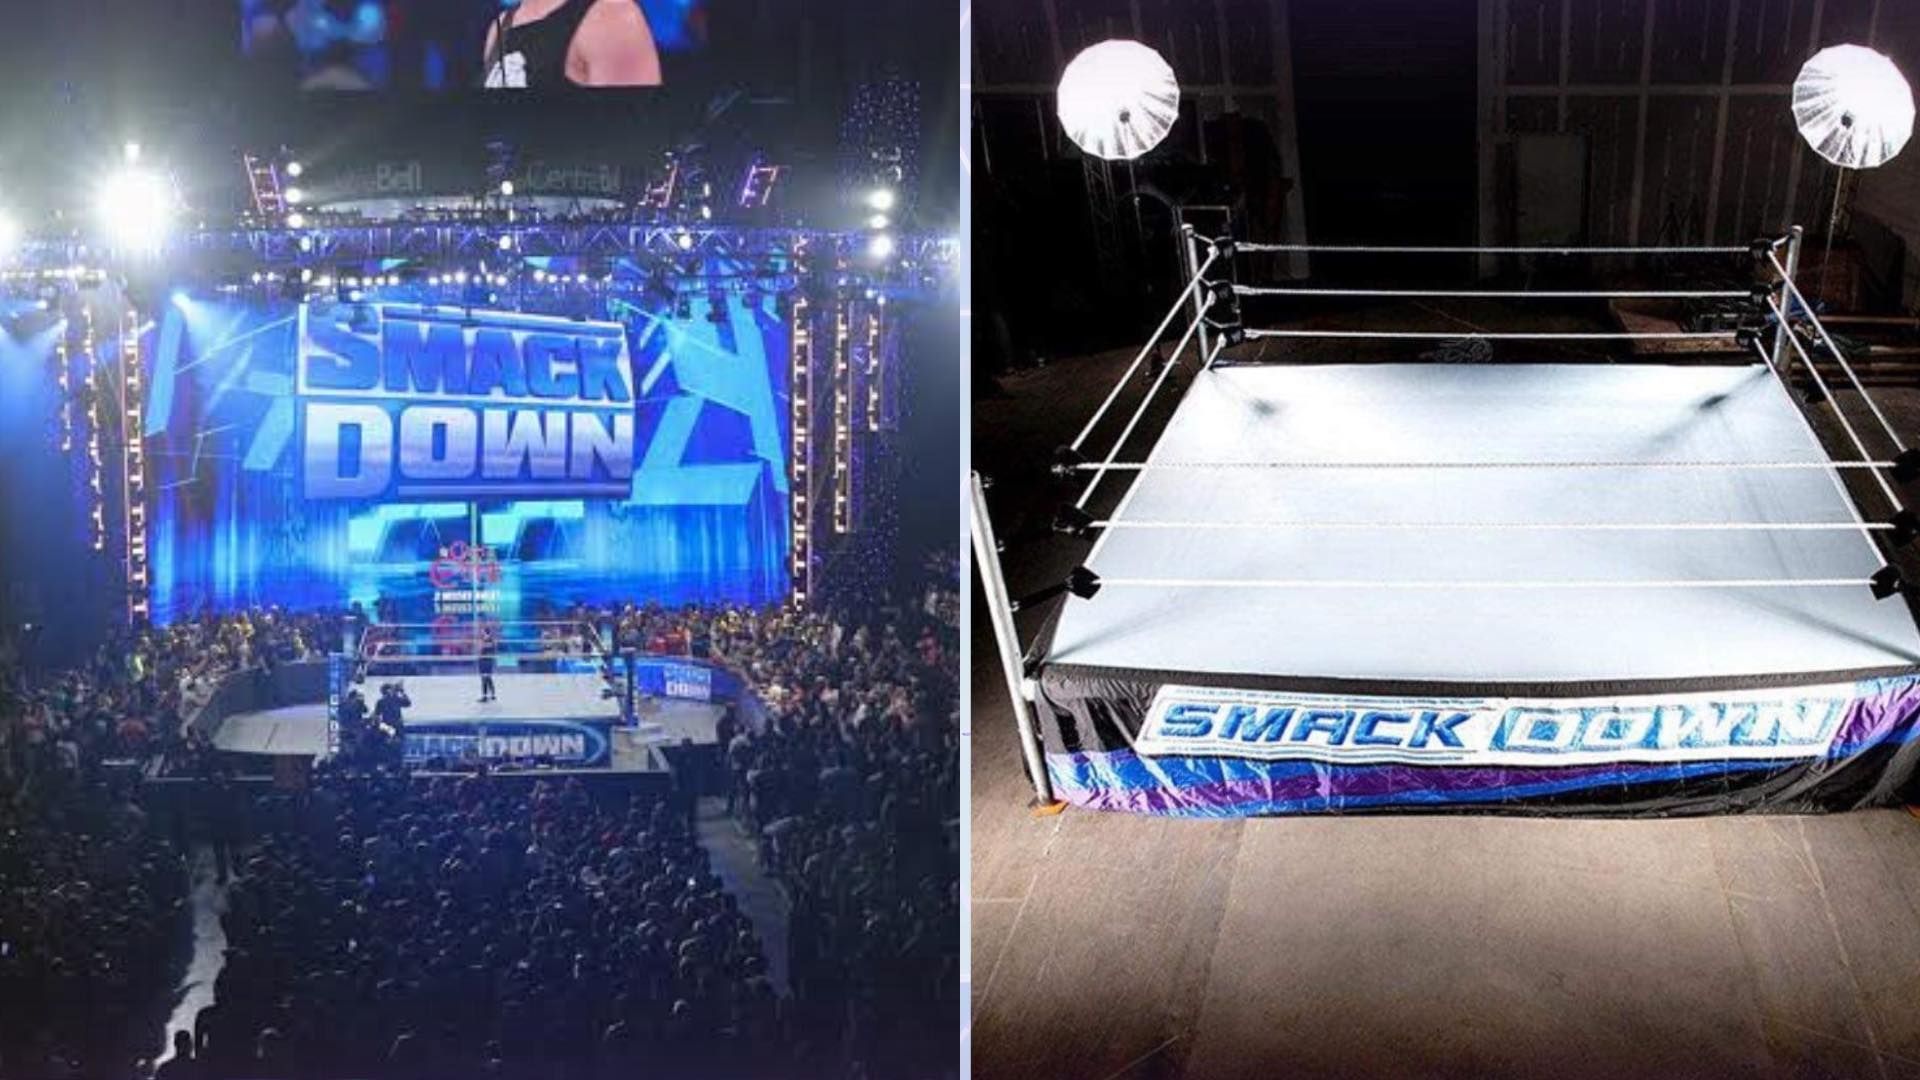 WWE SmackDown this week was live from the Delta Center in Salt Lake City, Utah